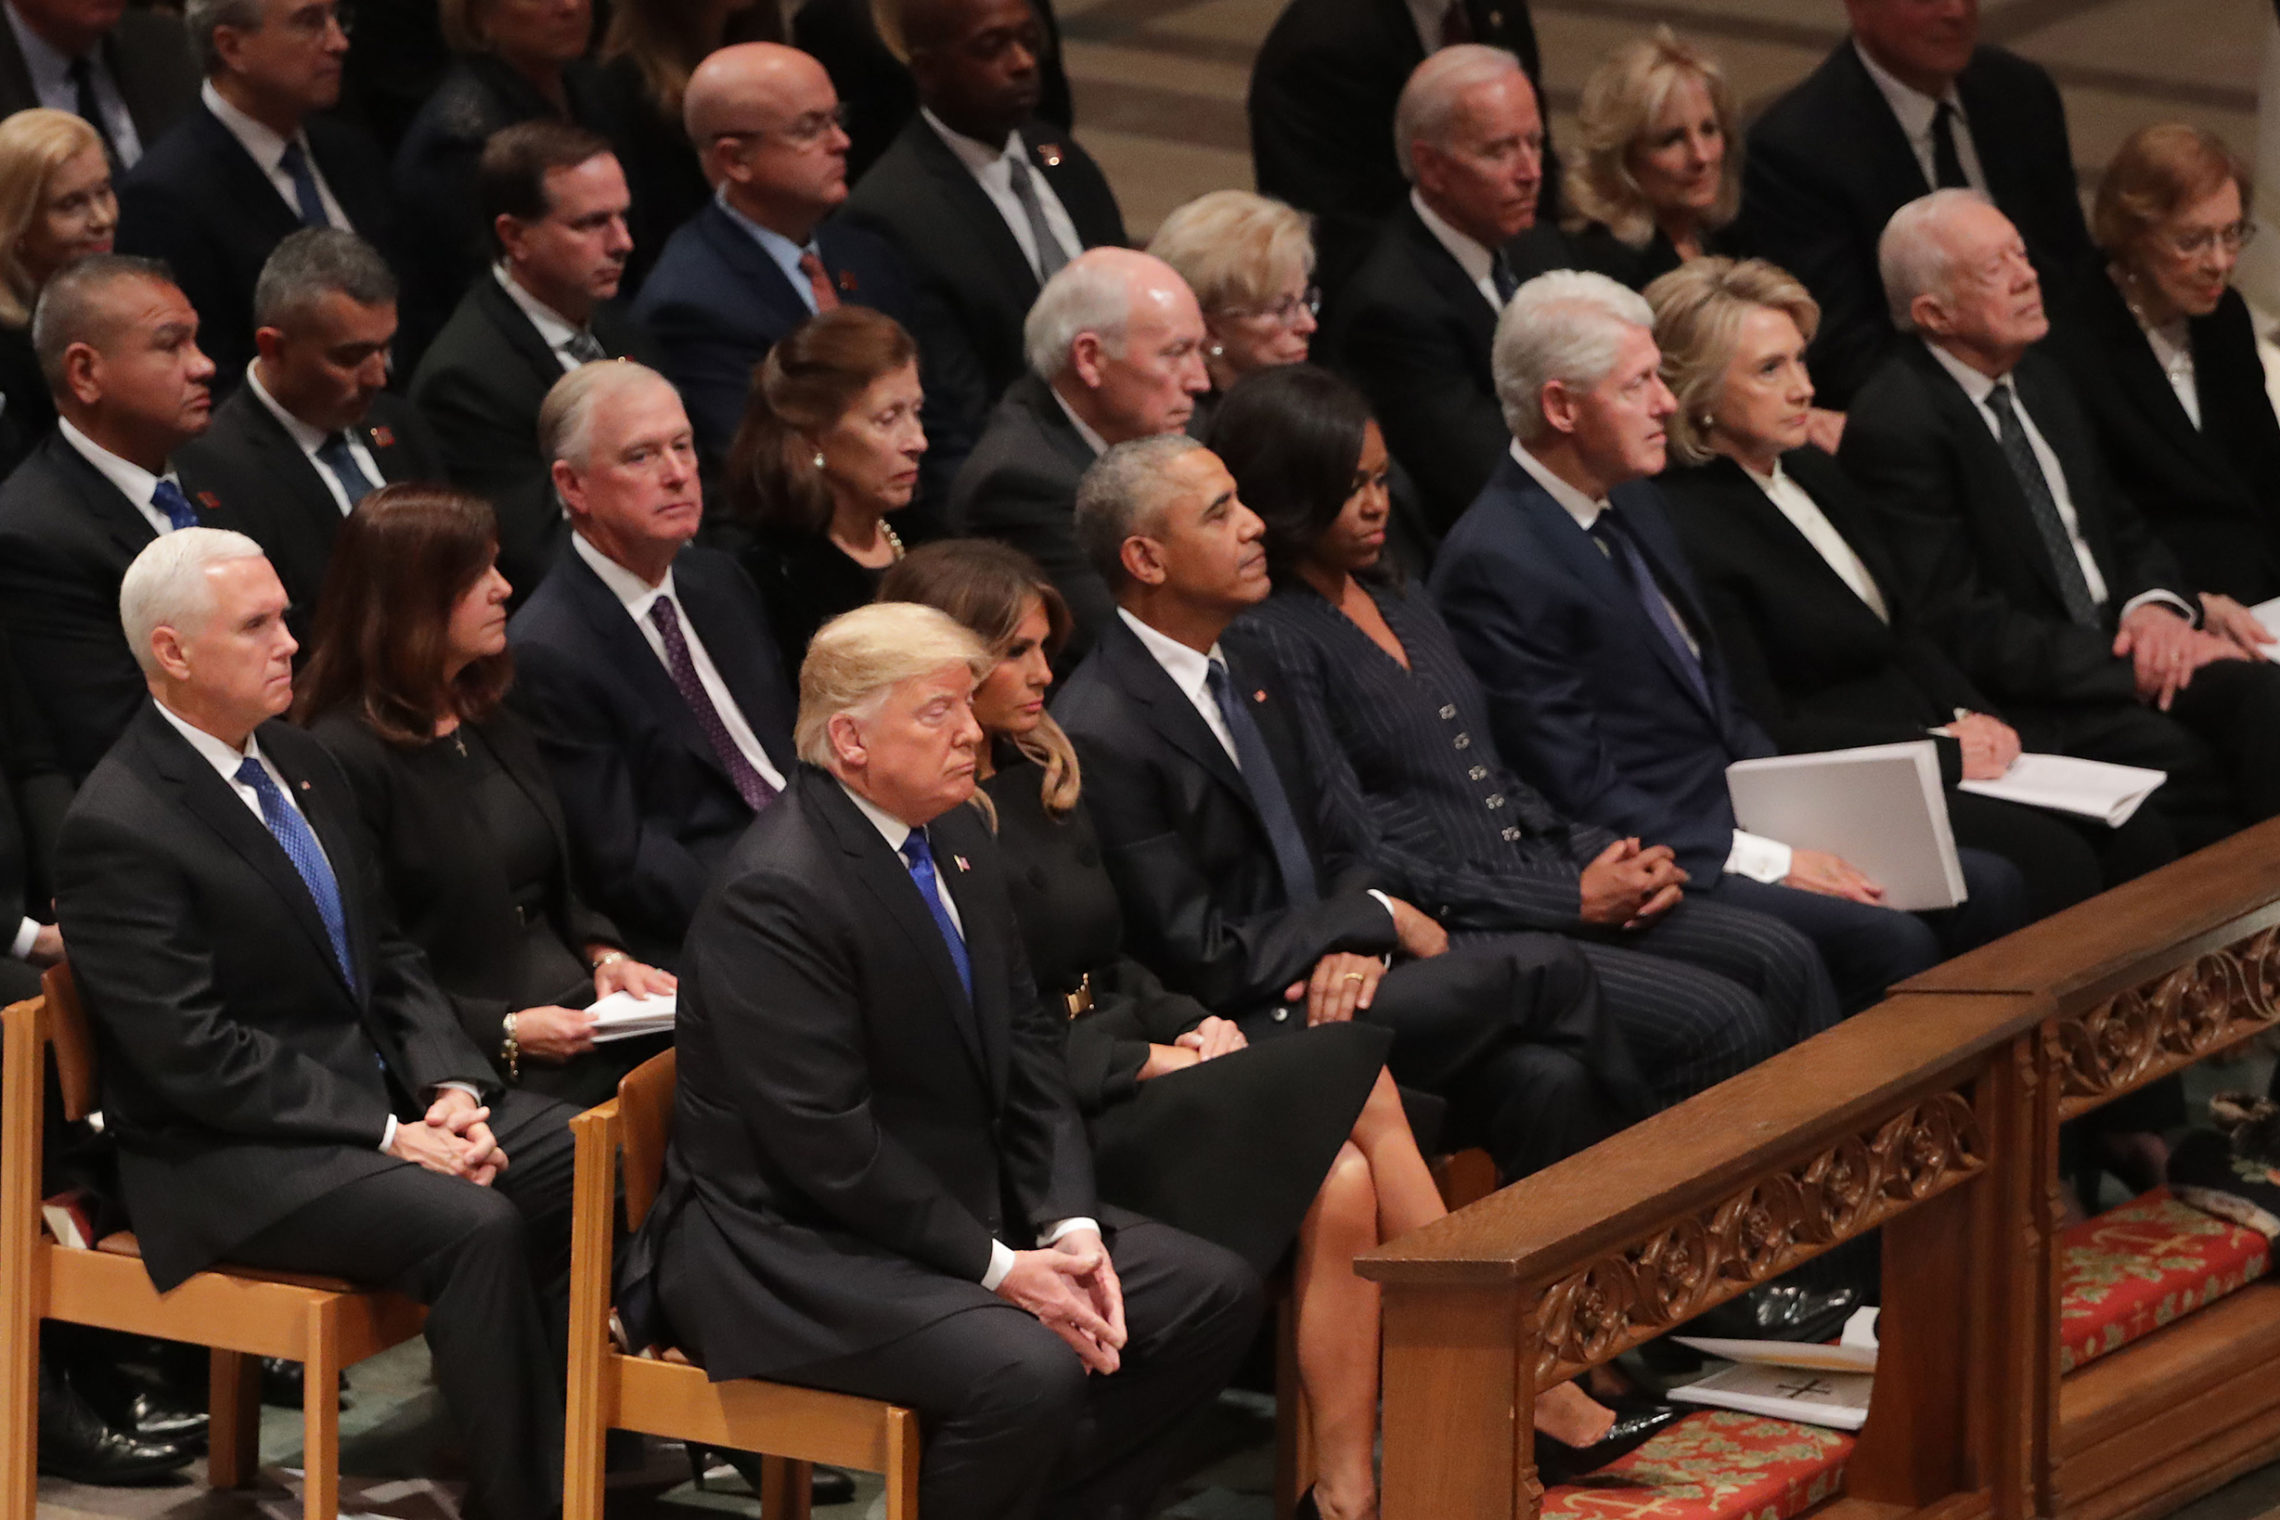 Former presidents, vice presidents, first ladies and President Trump attend the state funeral for former President George H.W. Bush at the National Cathedral on Wednesday. CREDIT: CHIP SOMODEVILLA/GETTY IMAGES